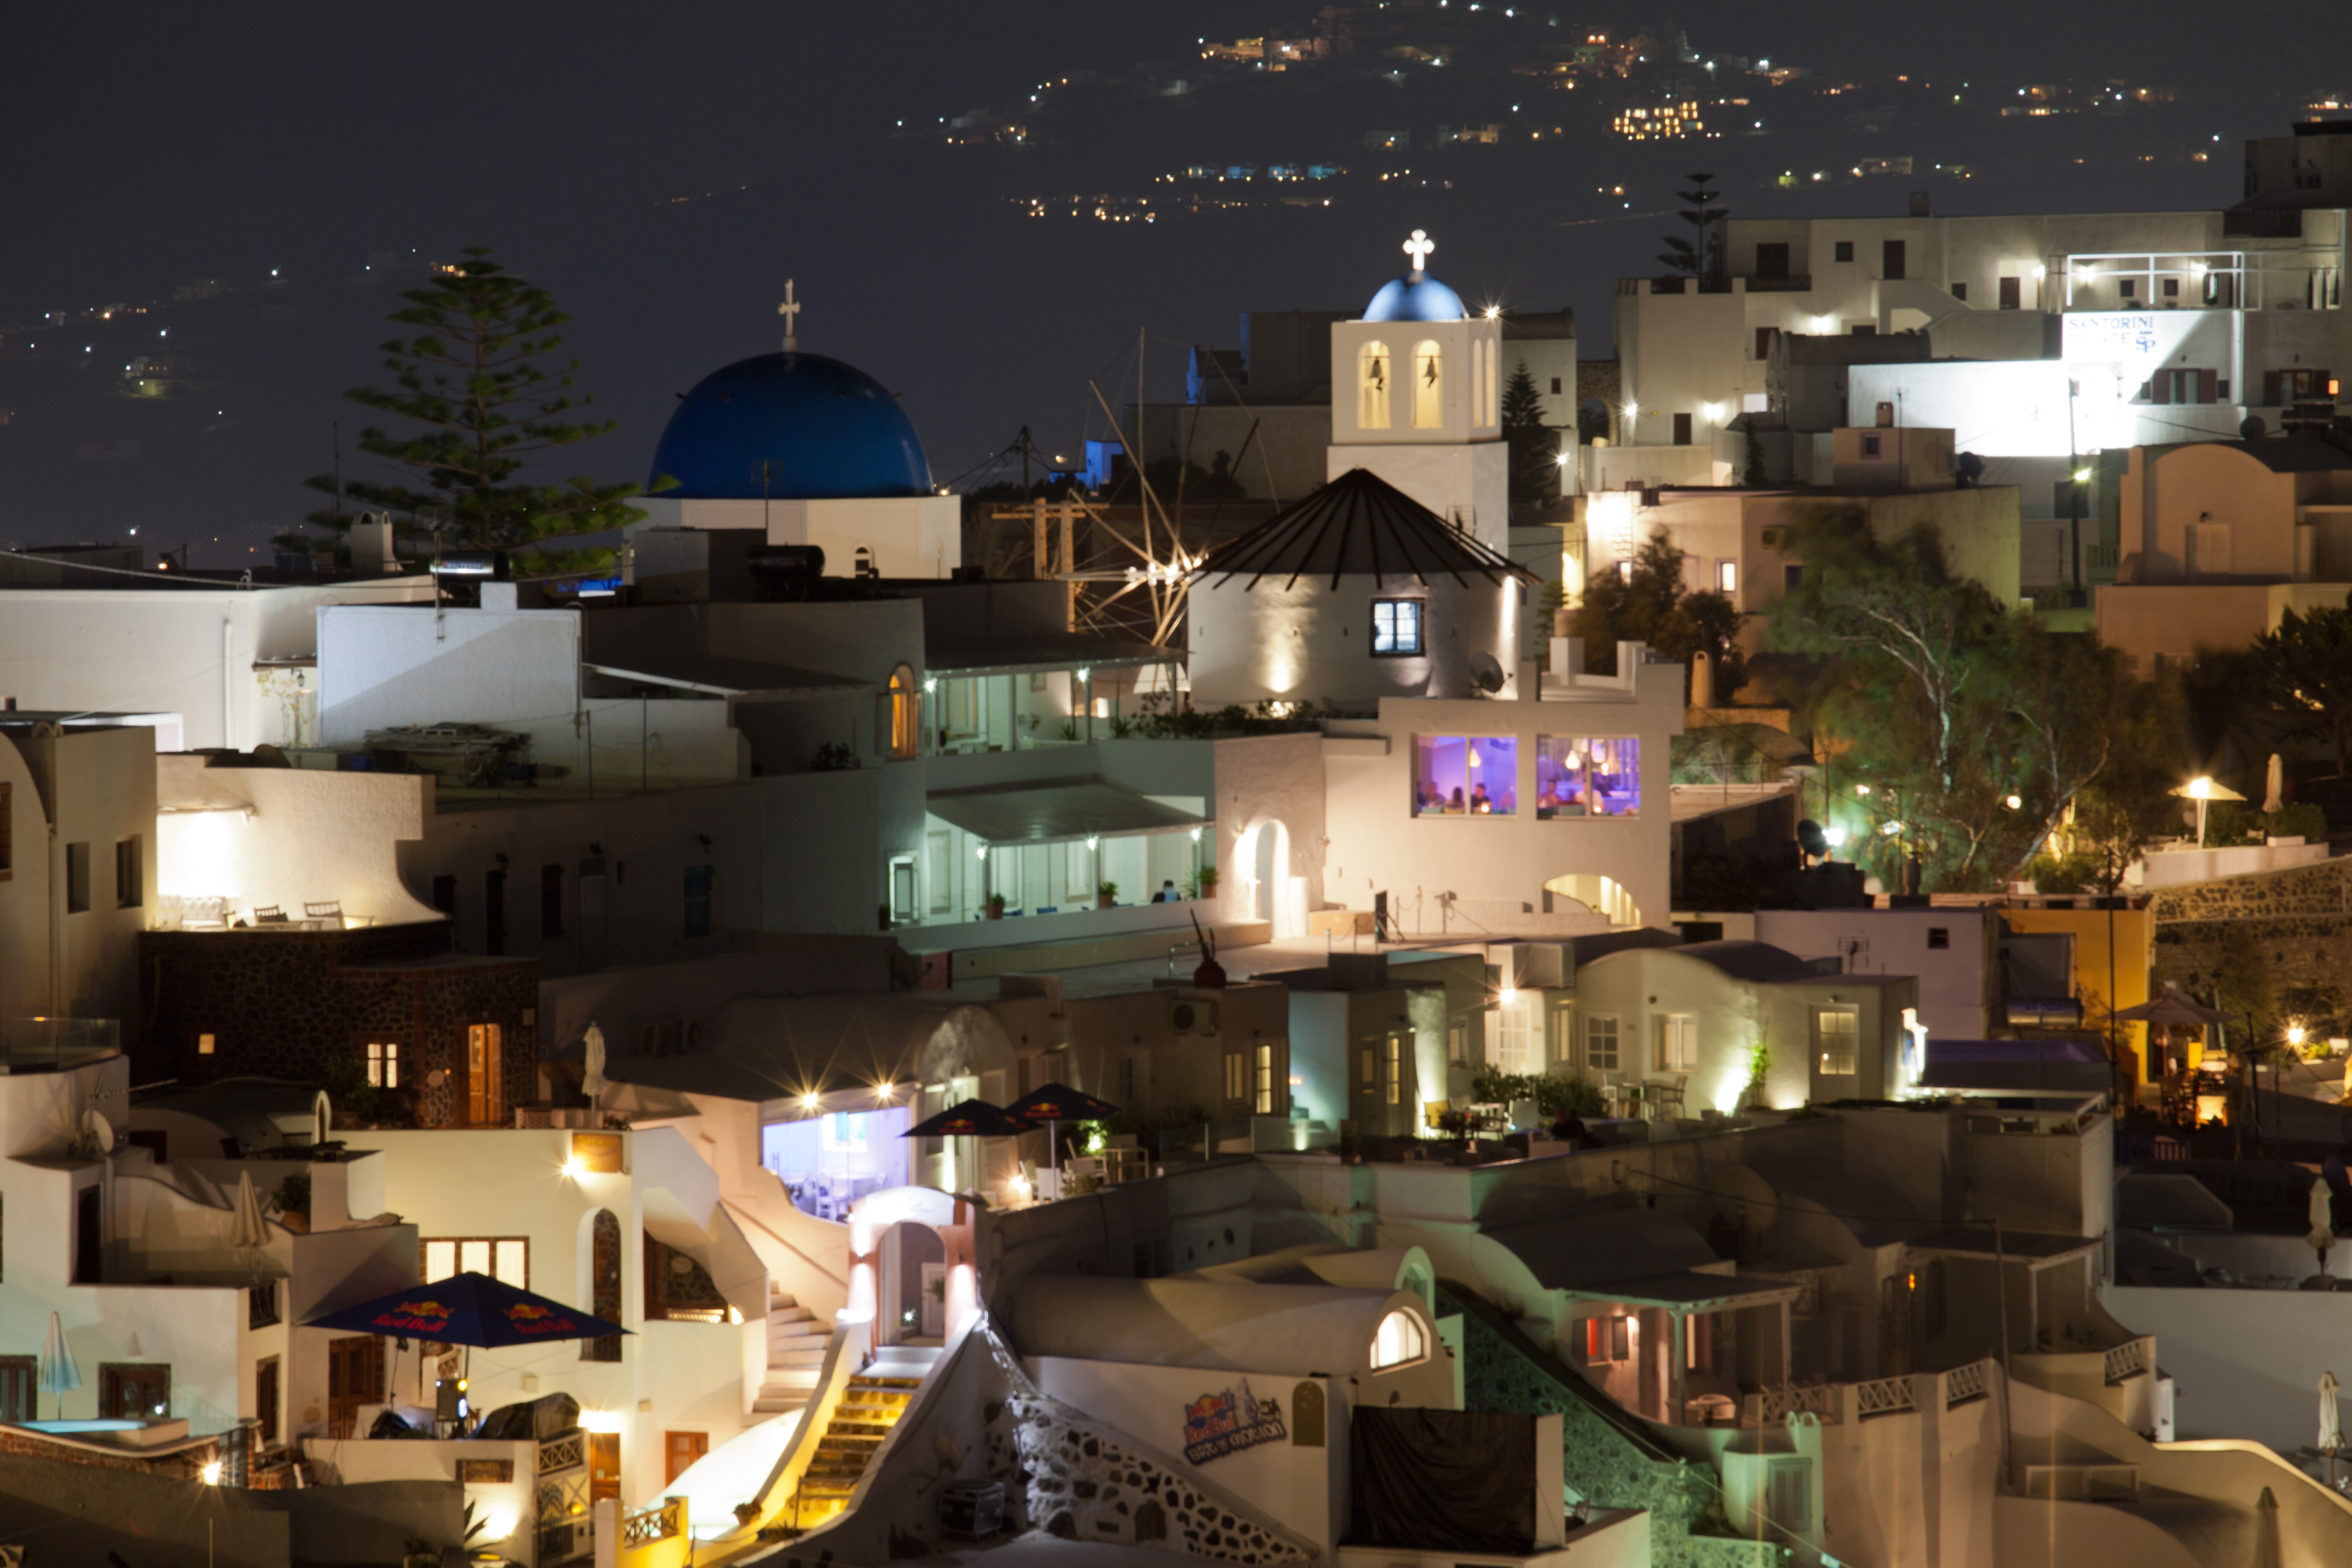 Town of Firostefani, Santorini, Greece at night with blue domed church